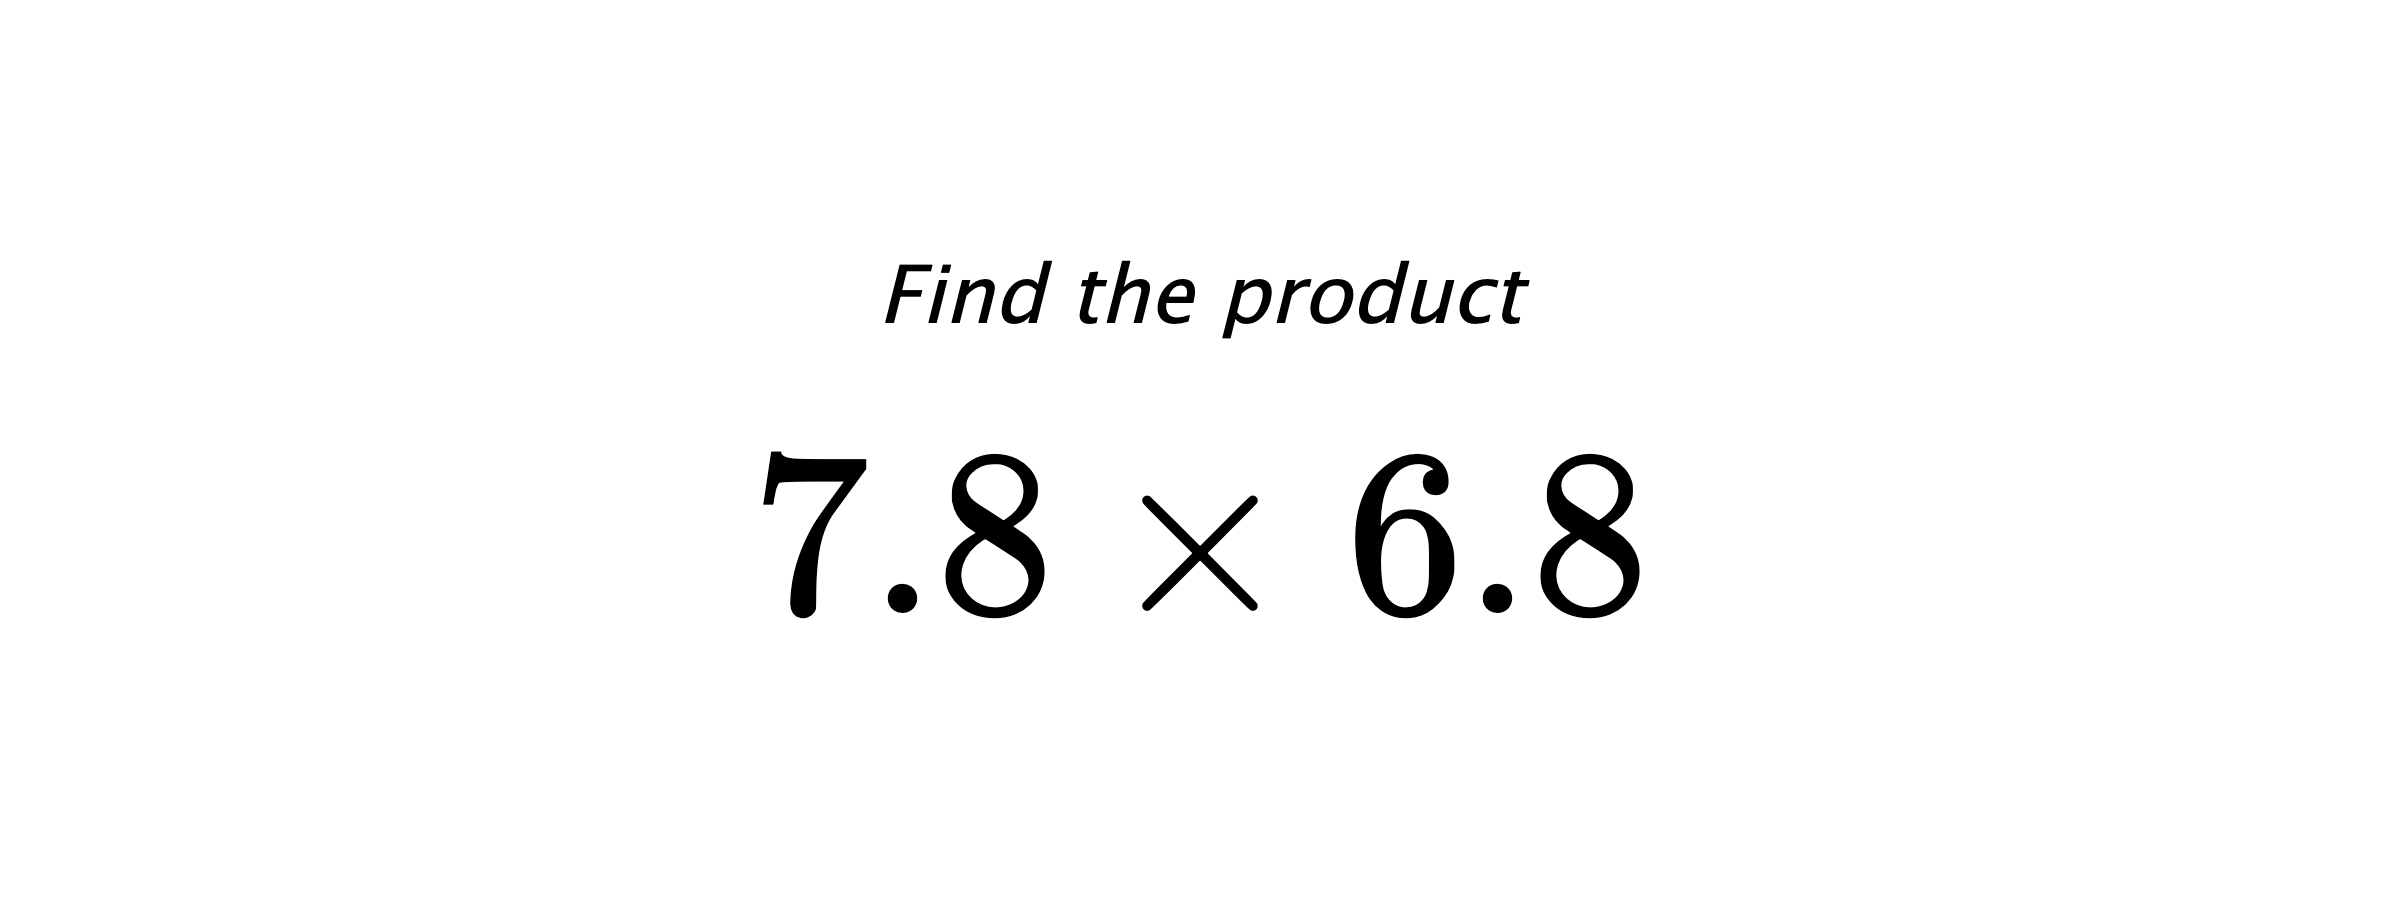 Find the product $ 7.8 \times 6.8 $